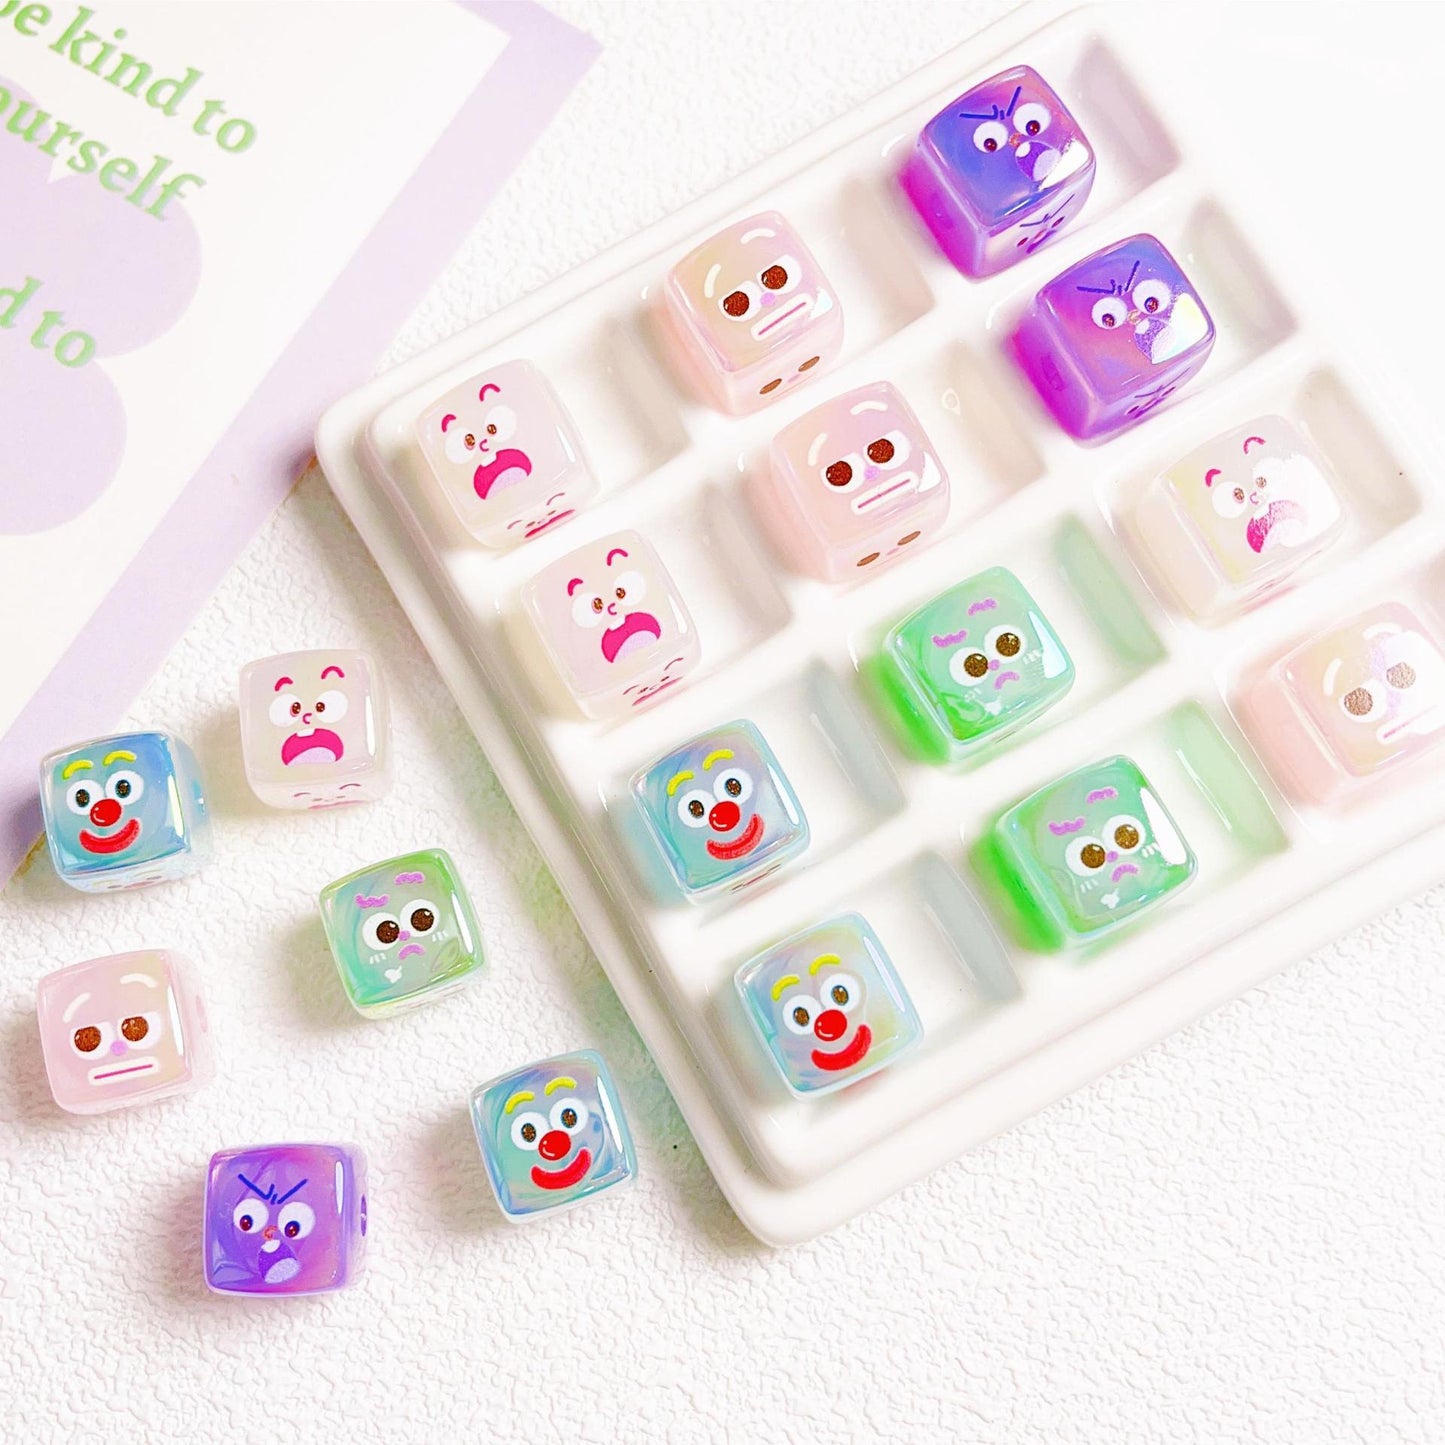 30 Pieces Cartoon Funny Cube Loose Beads（14mm）